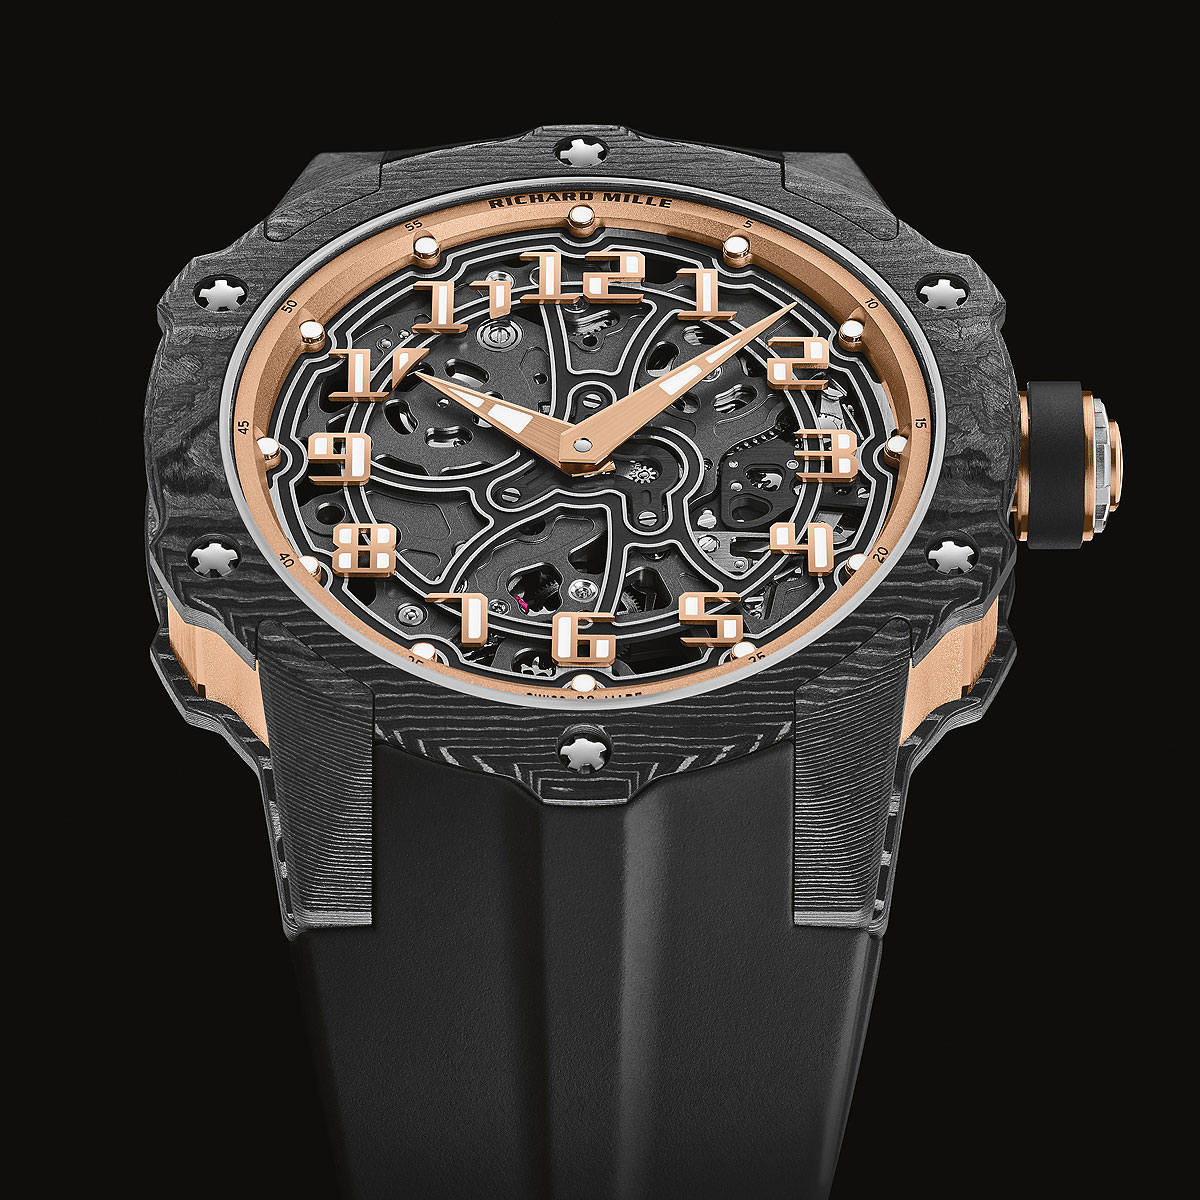 Revolution Re-Imagined: Richard Mille RM 33-02 Automatic in New Carbon ...